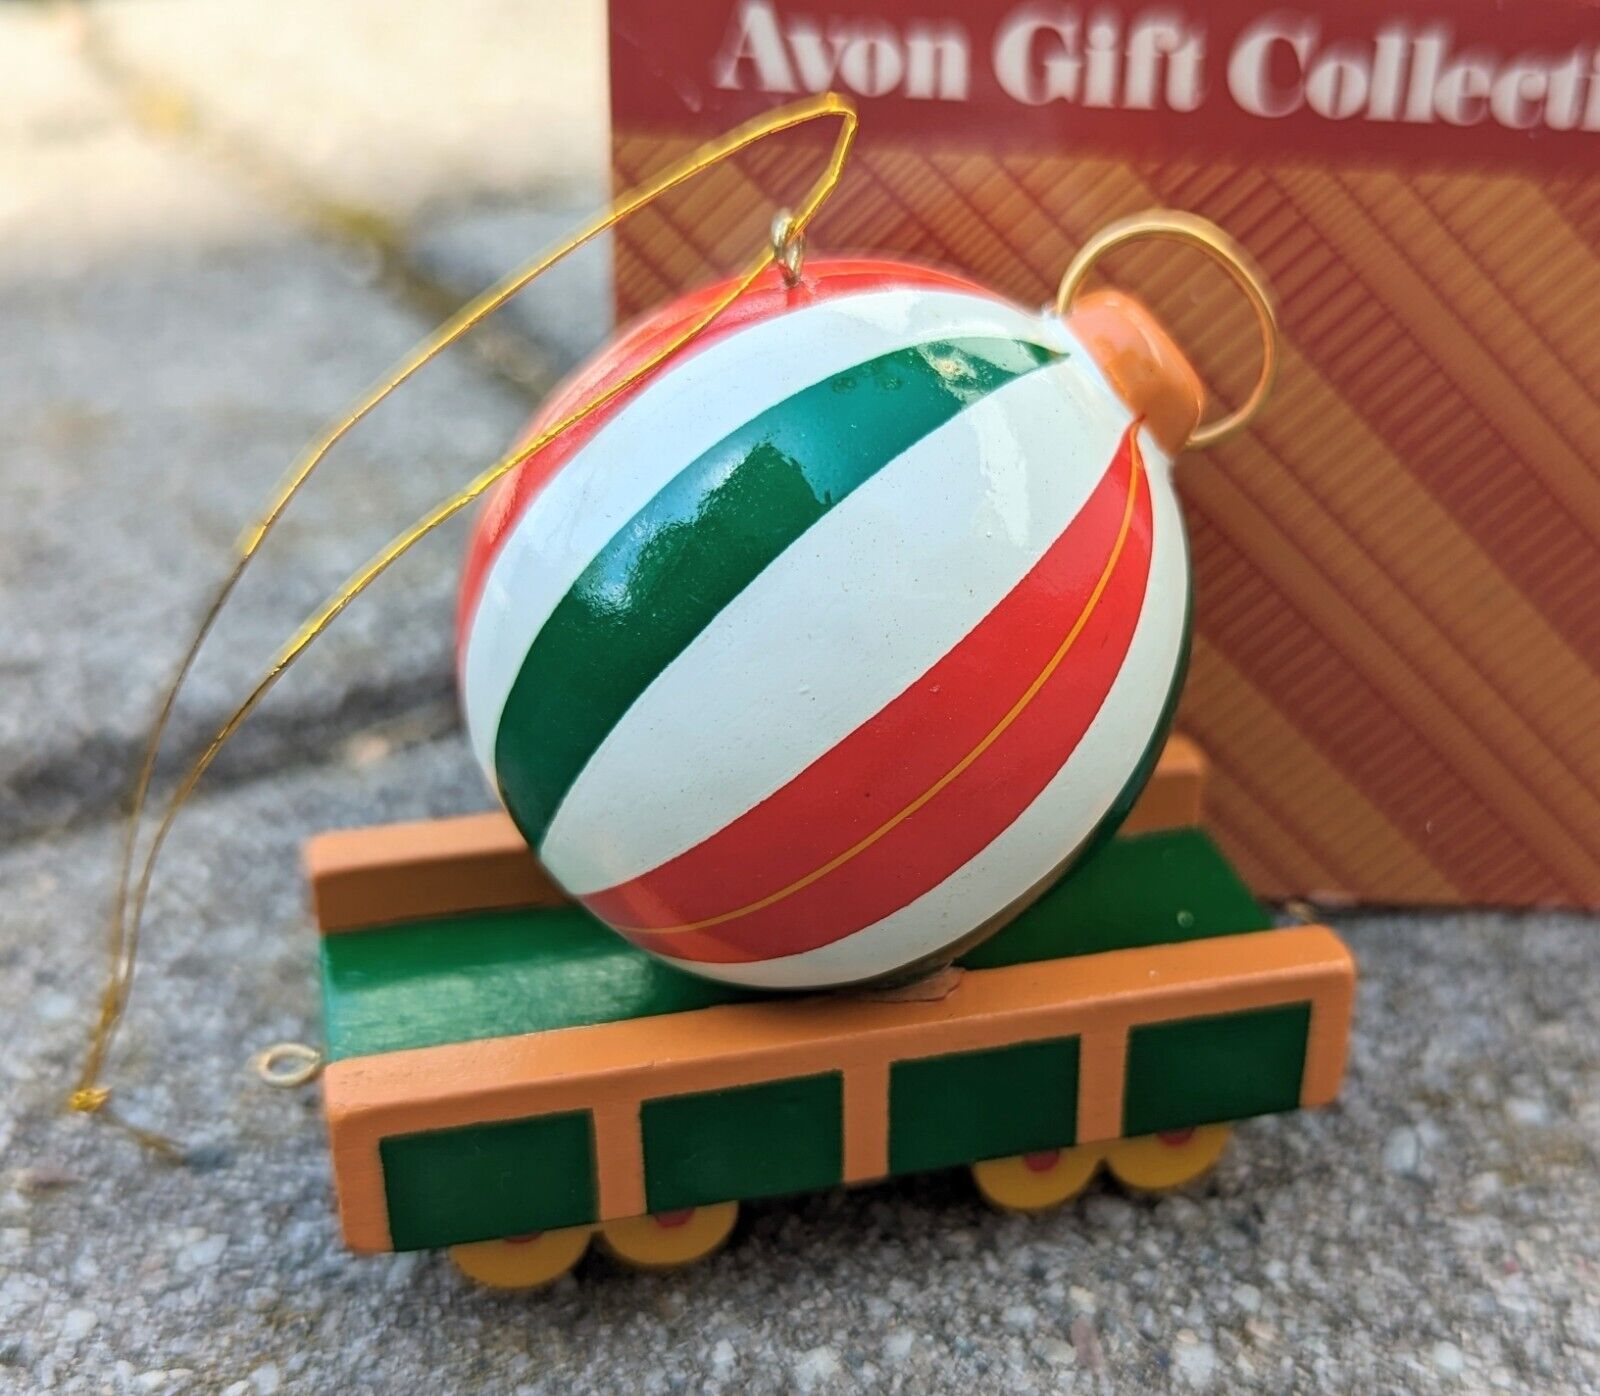 NEW Avon Gift Collection Christmas Train- Ornament Car VINTAGE